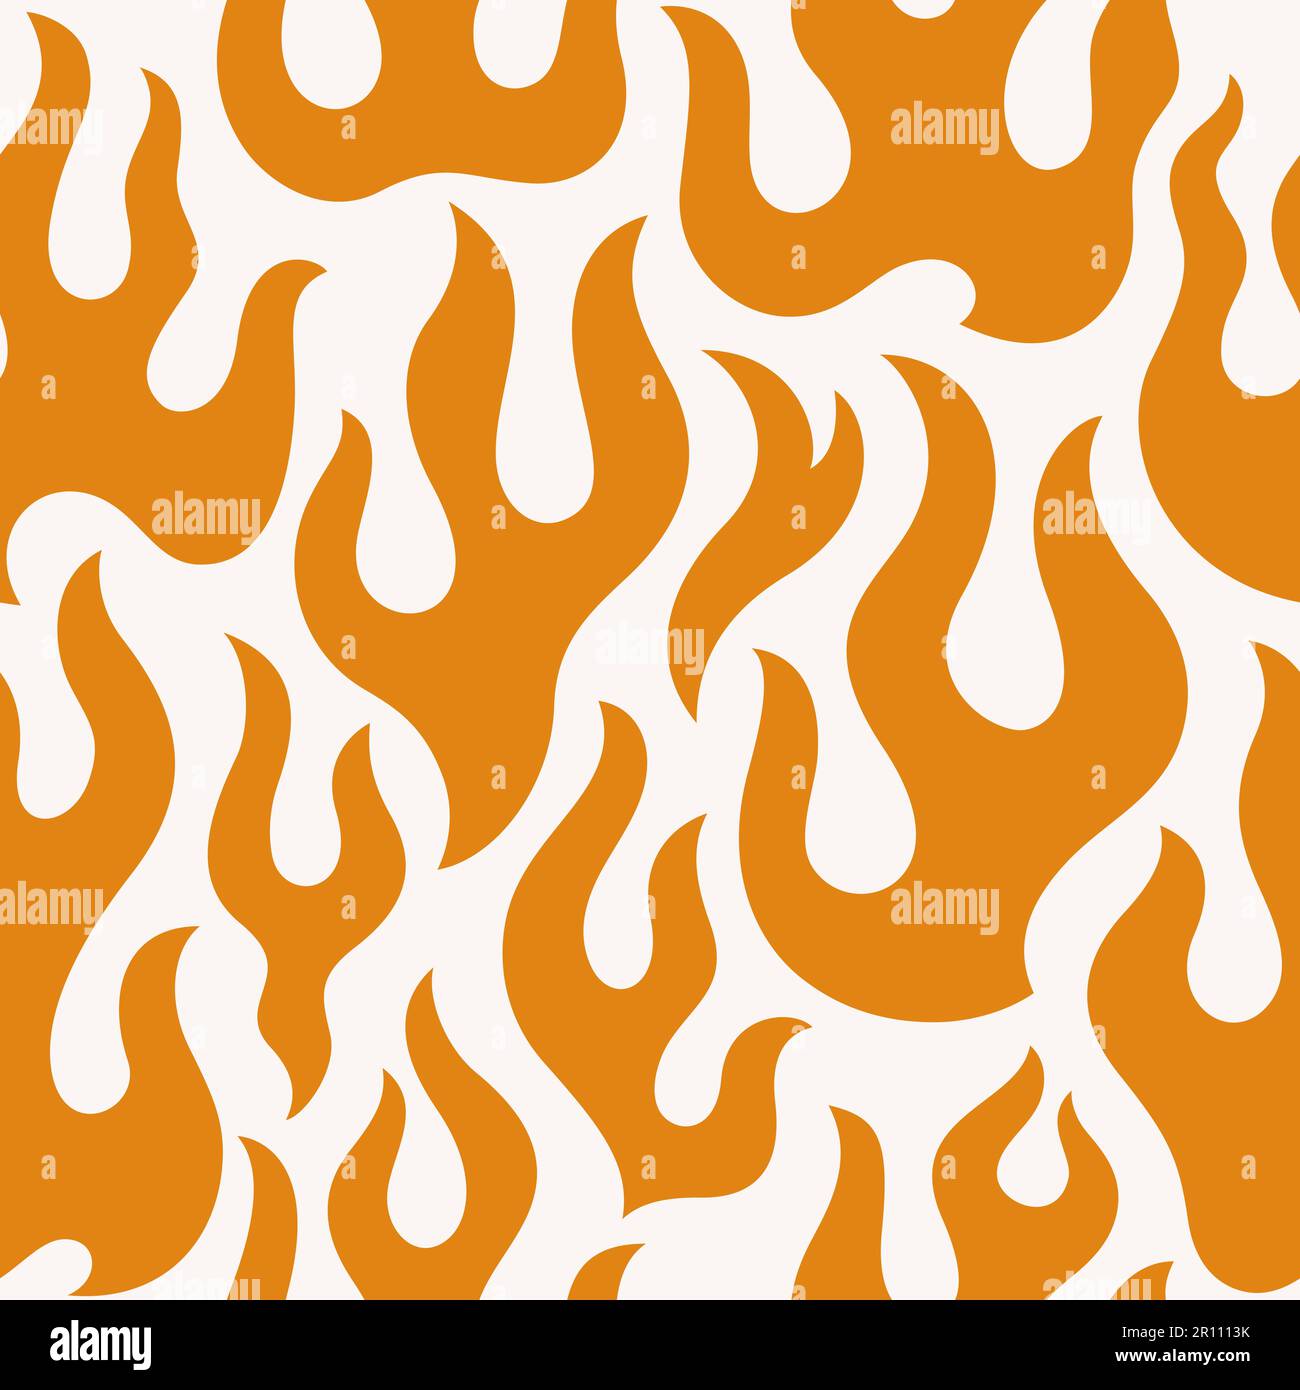 Groovy Orange Flame Seamless Pattern. Abstract Fire Vector Background in 1970s Hippie Retro Style for Print on Textile, Wrapping Paper, Web Design Stock Vector